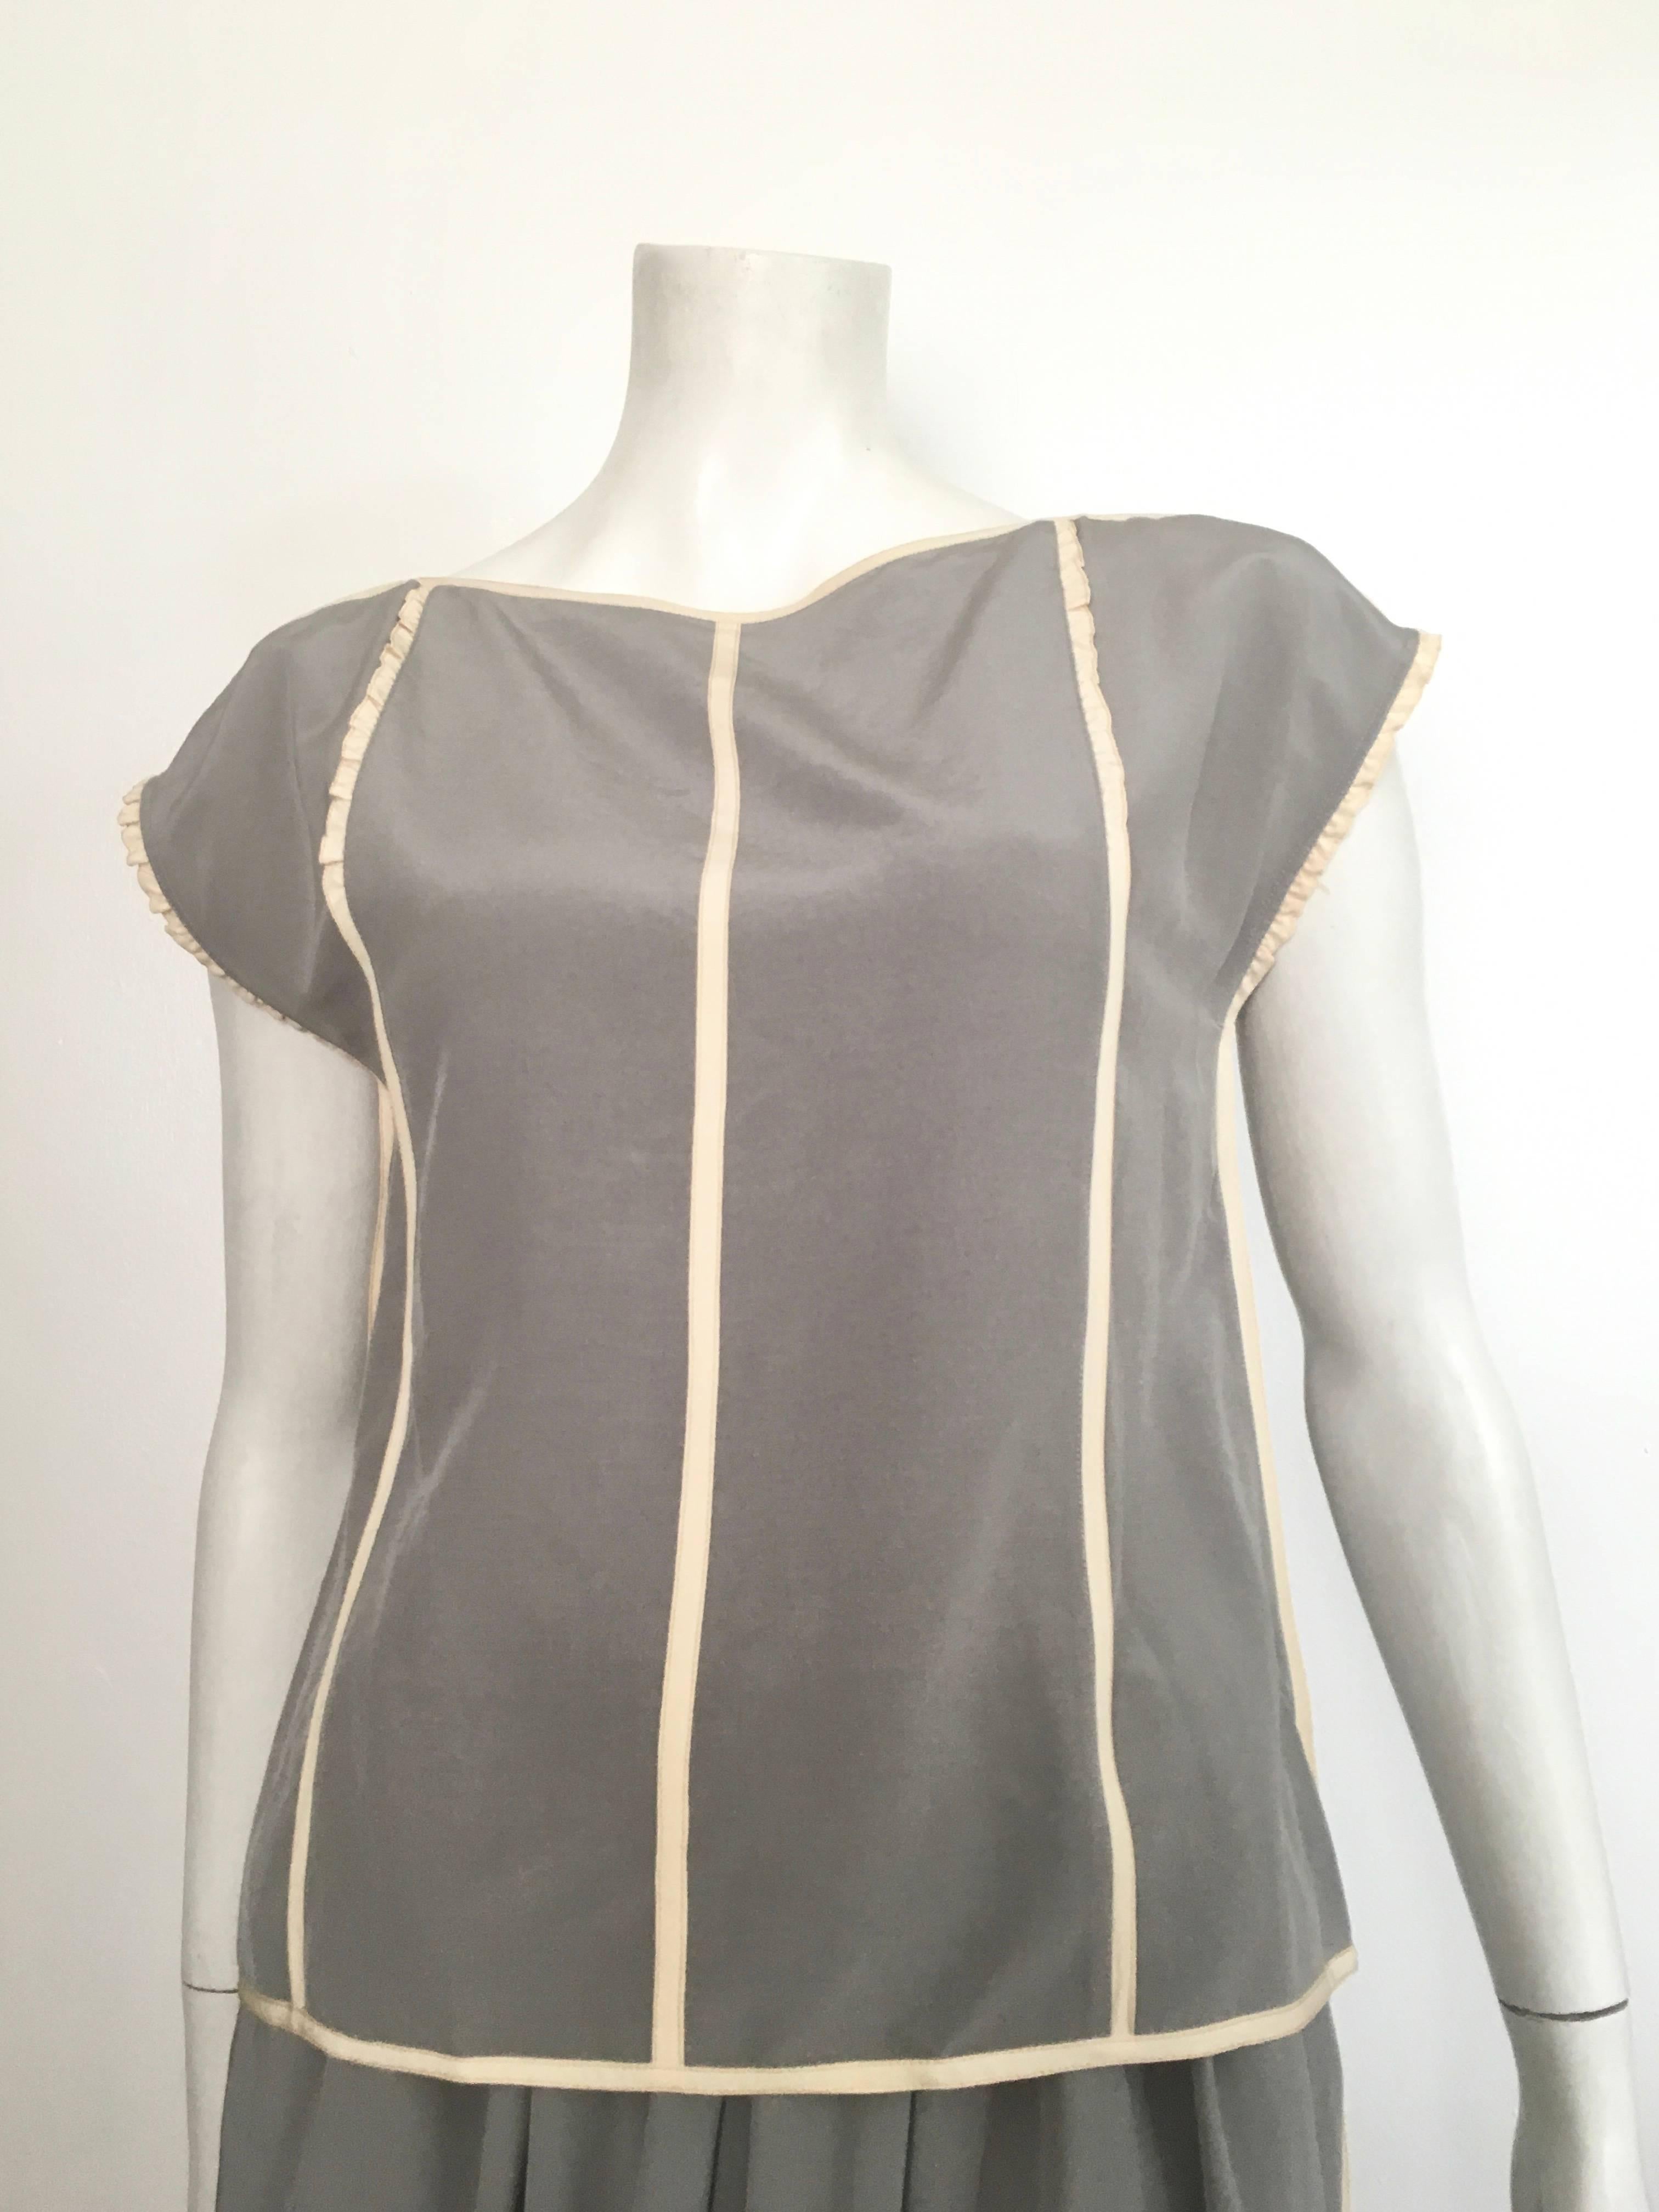 Geoffrey Beene for Neiman Marcus 1970s Silk Blouse & Skirt with pockets Size 2.  For Sale 2